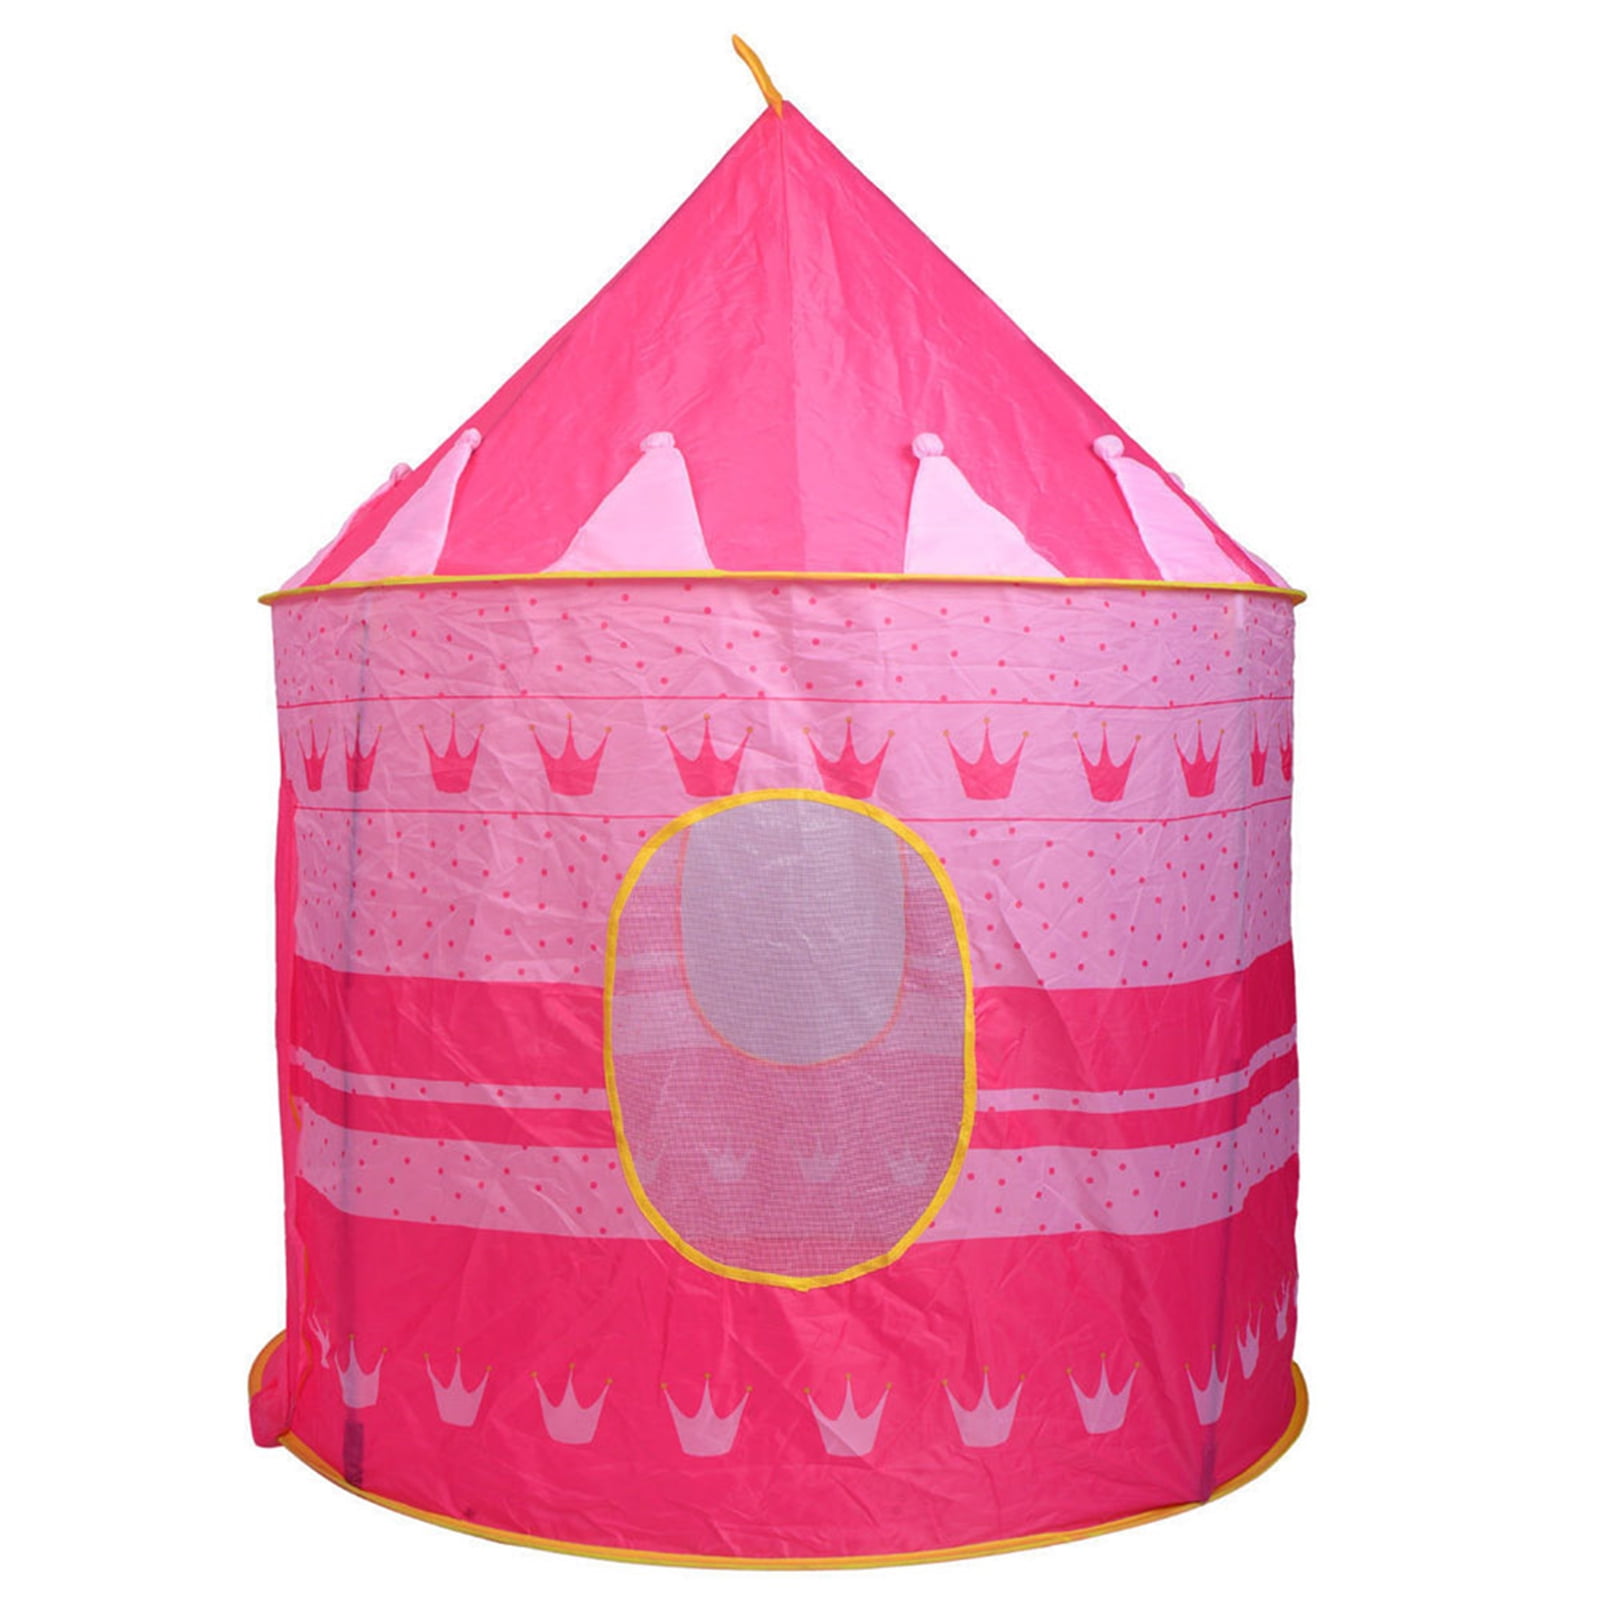 Details about   Portable Folding Castle Play House Tent Children Kids Girls Boys Indoor/Outdoor 